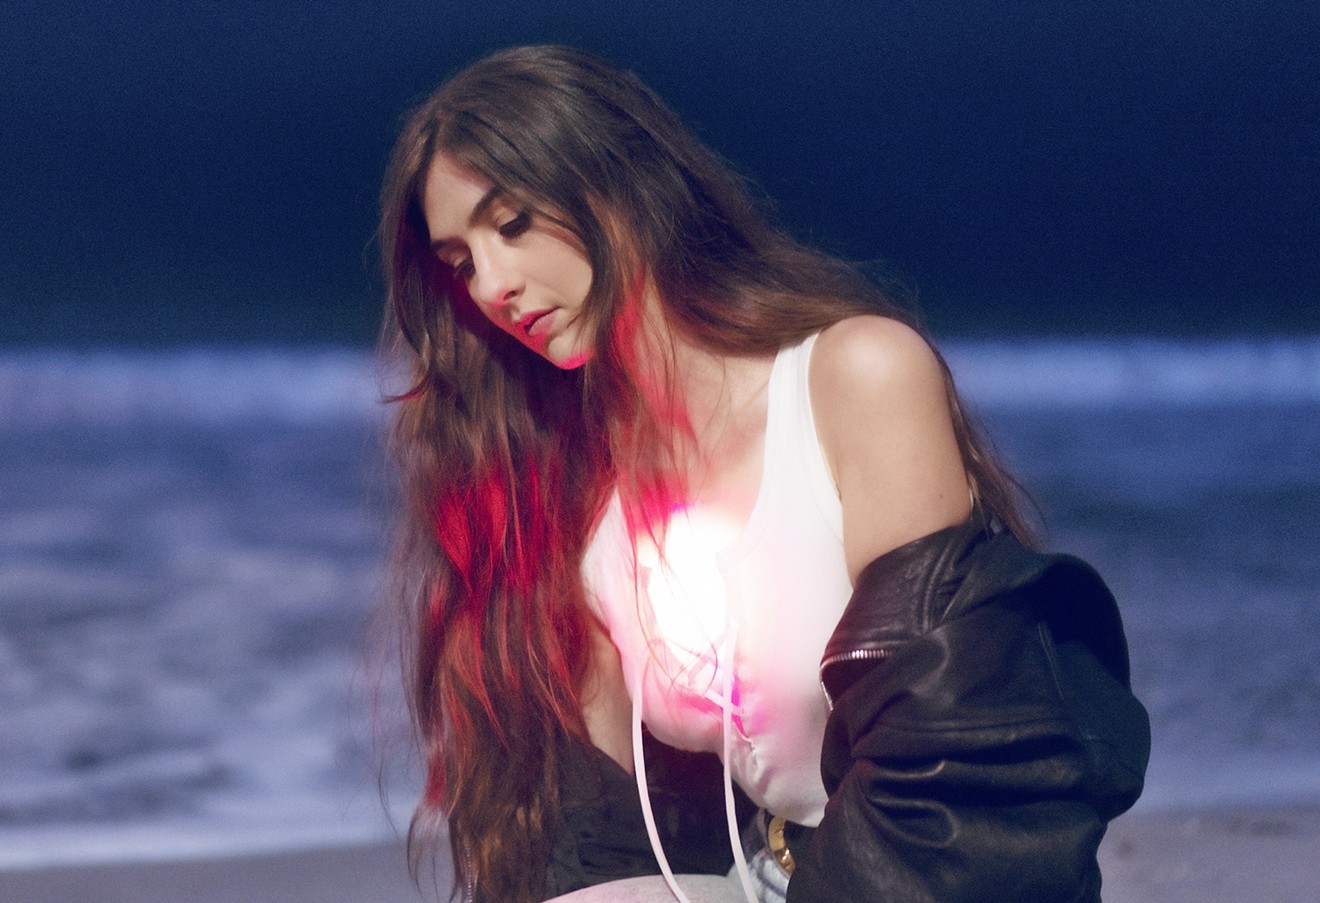 Weyes Blood is scheduled to perform on Tuesday, March 28, at The Van Buren.